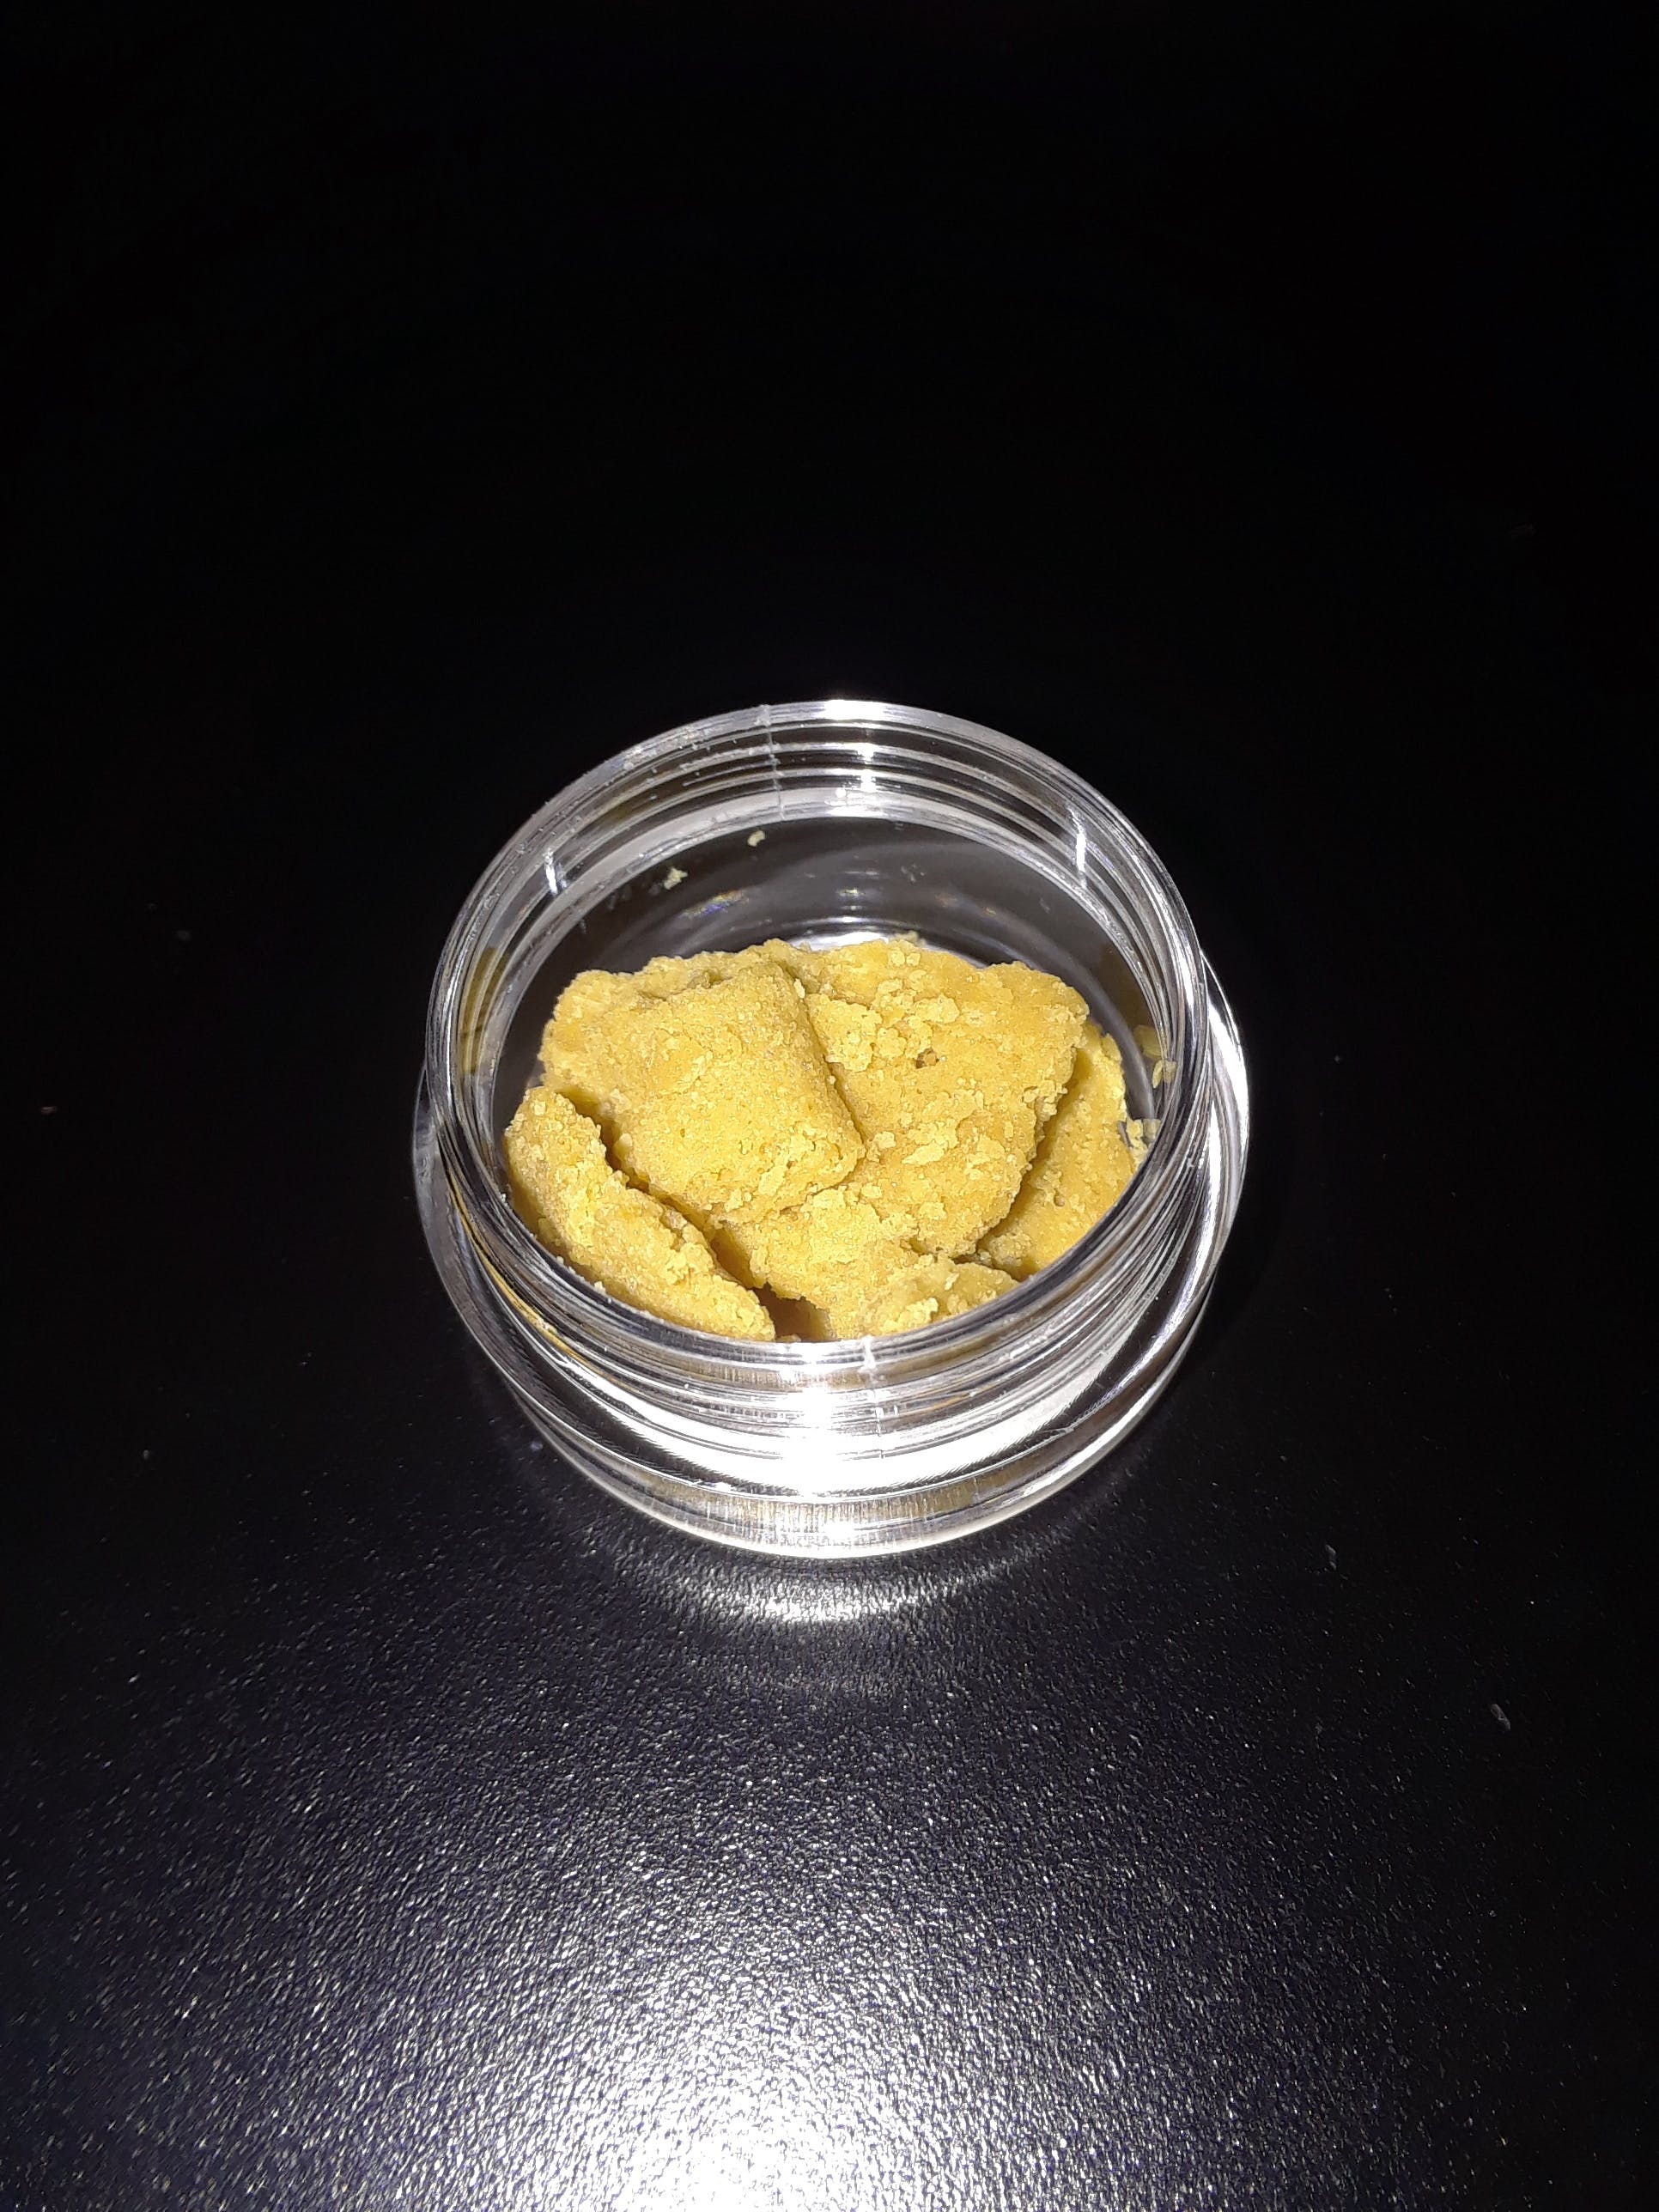 wax-biscotti-og-2-for-35